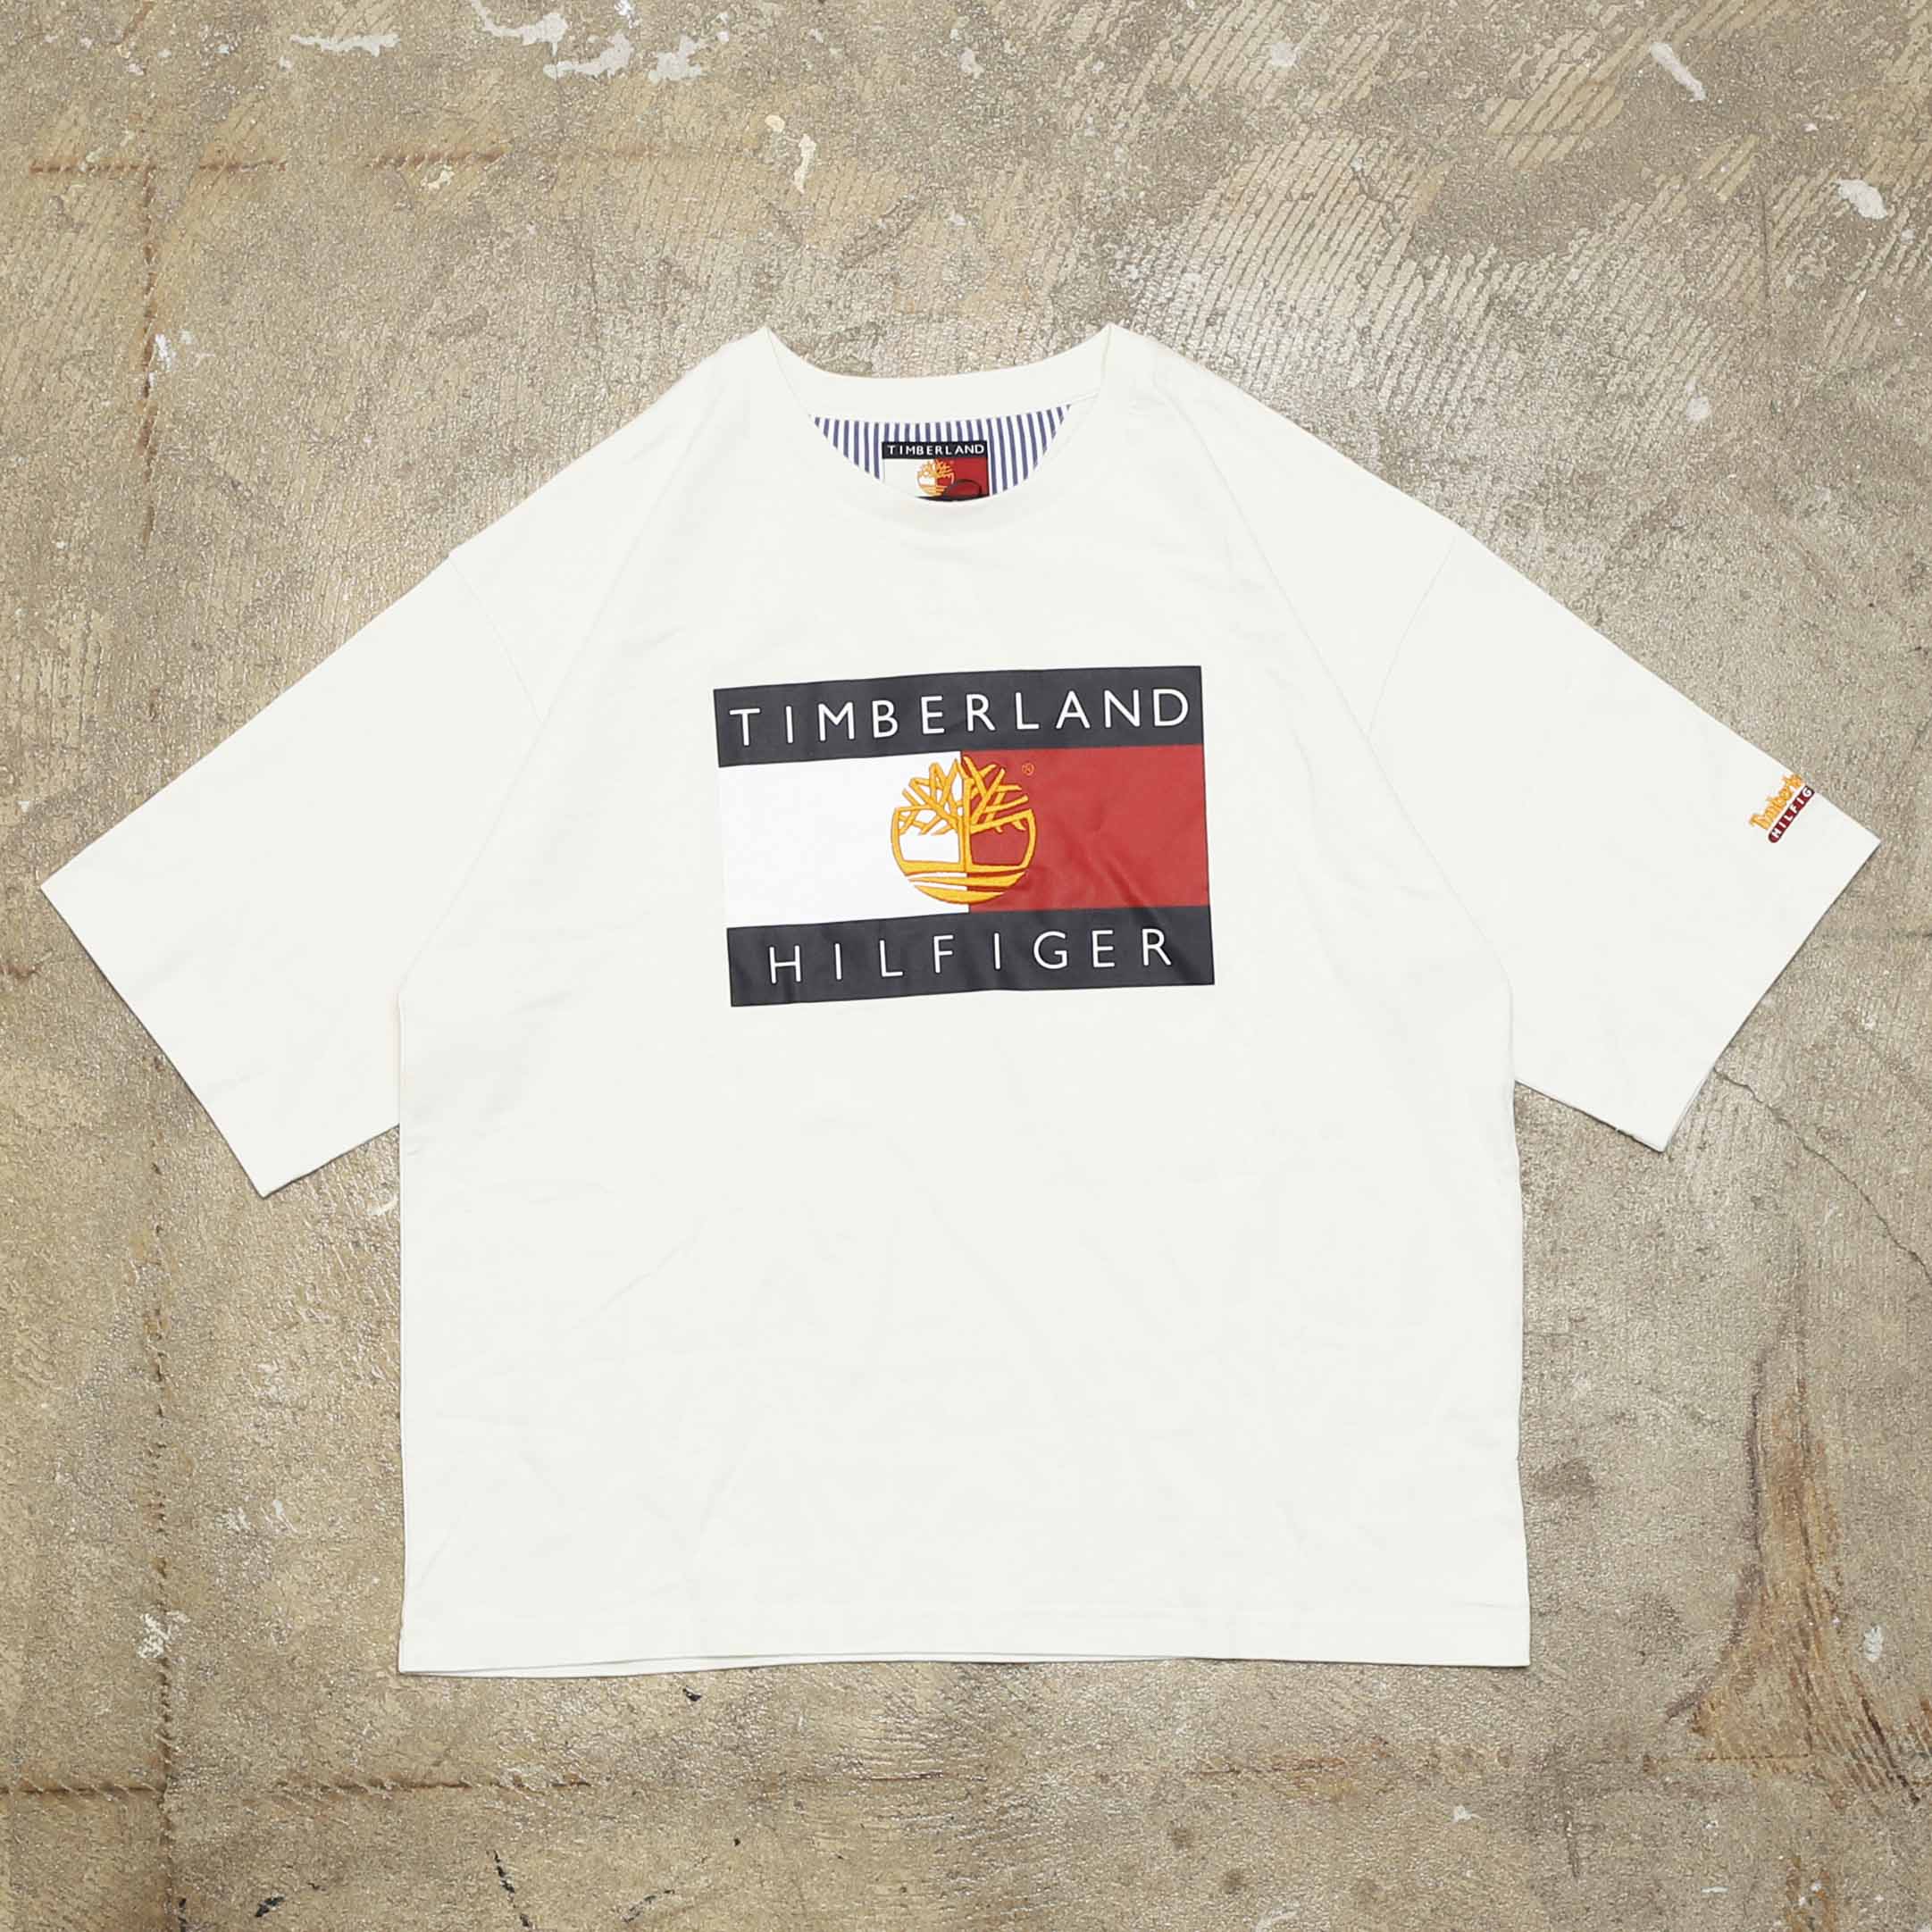 TOMMY HILFIGER X TIMBERLAND S/S TEE - WHITE